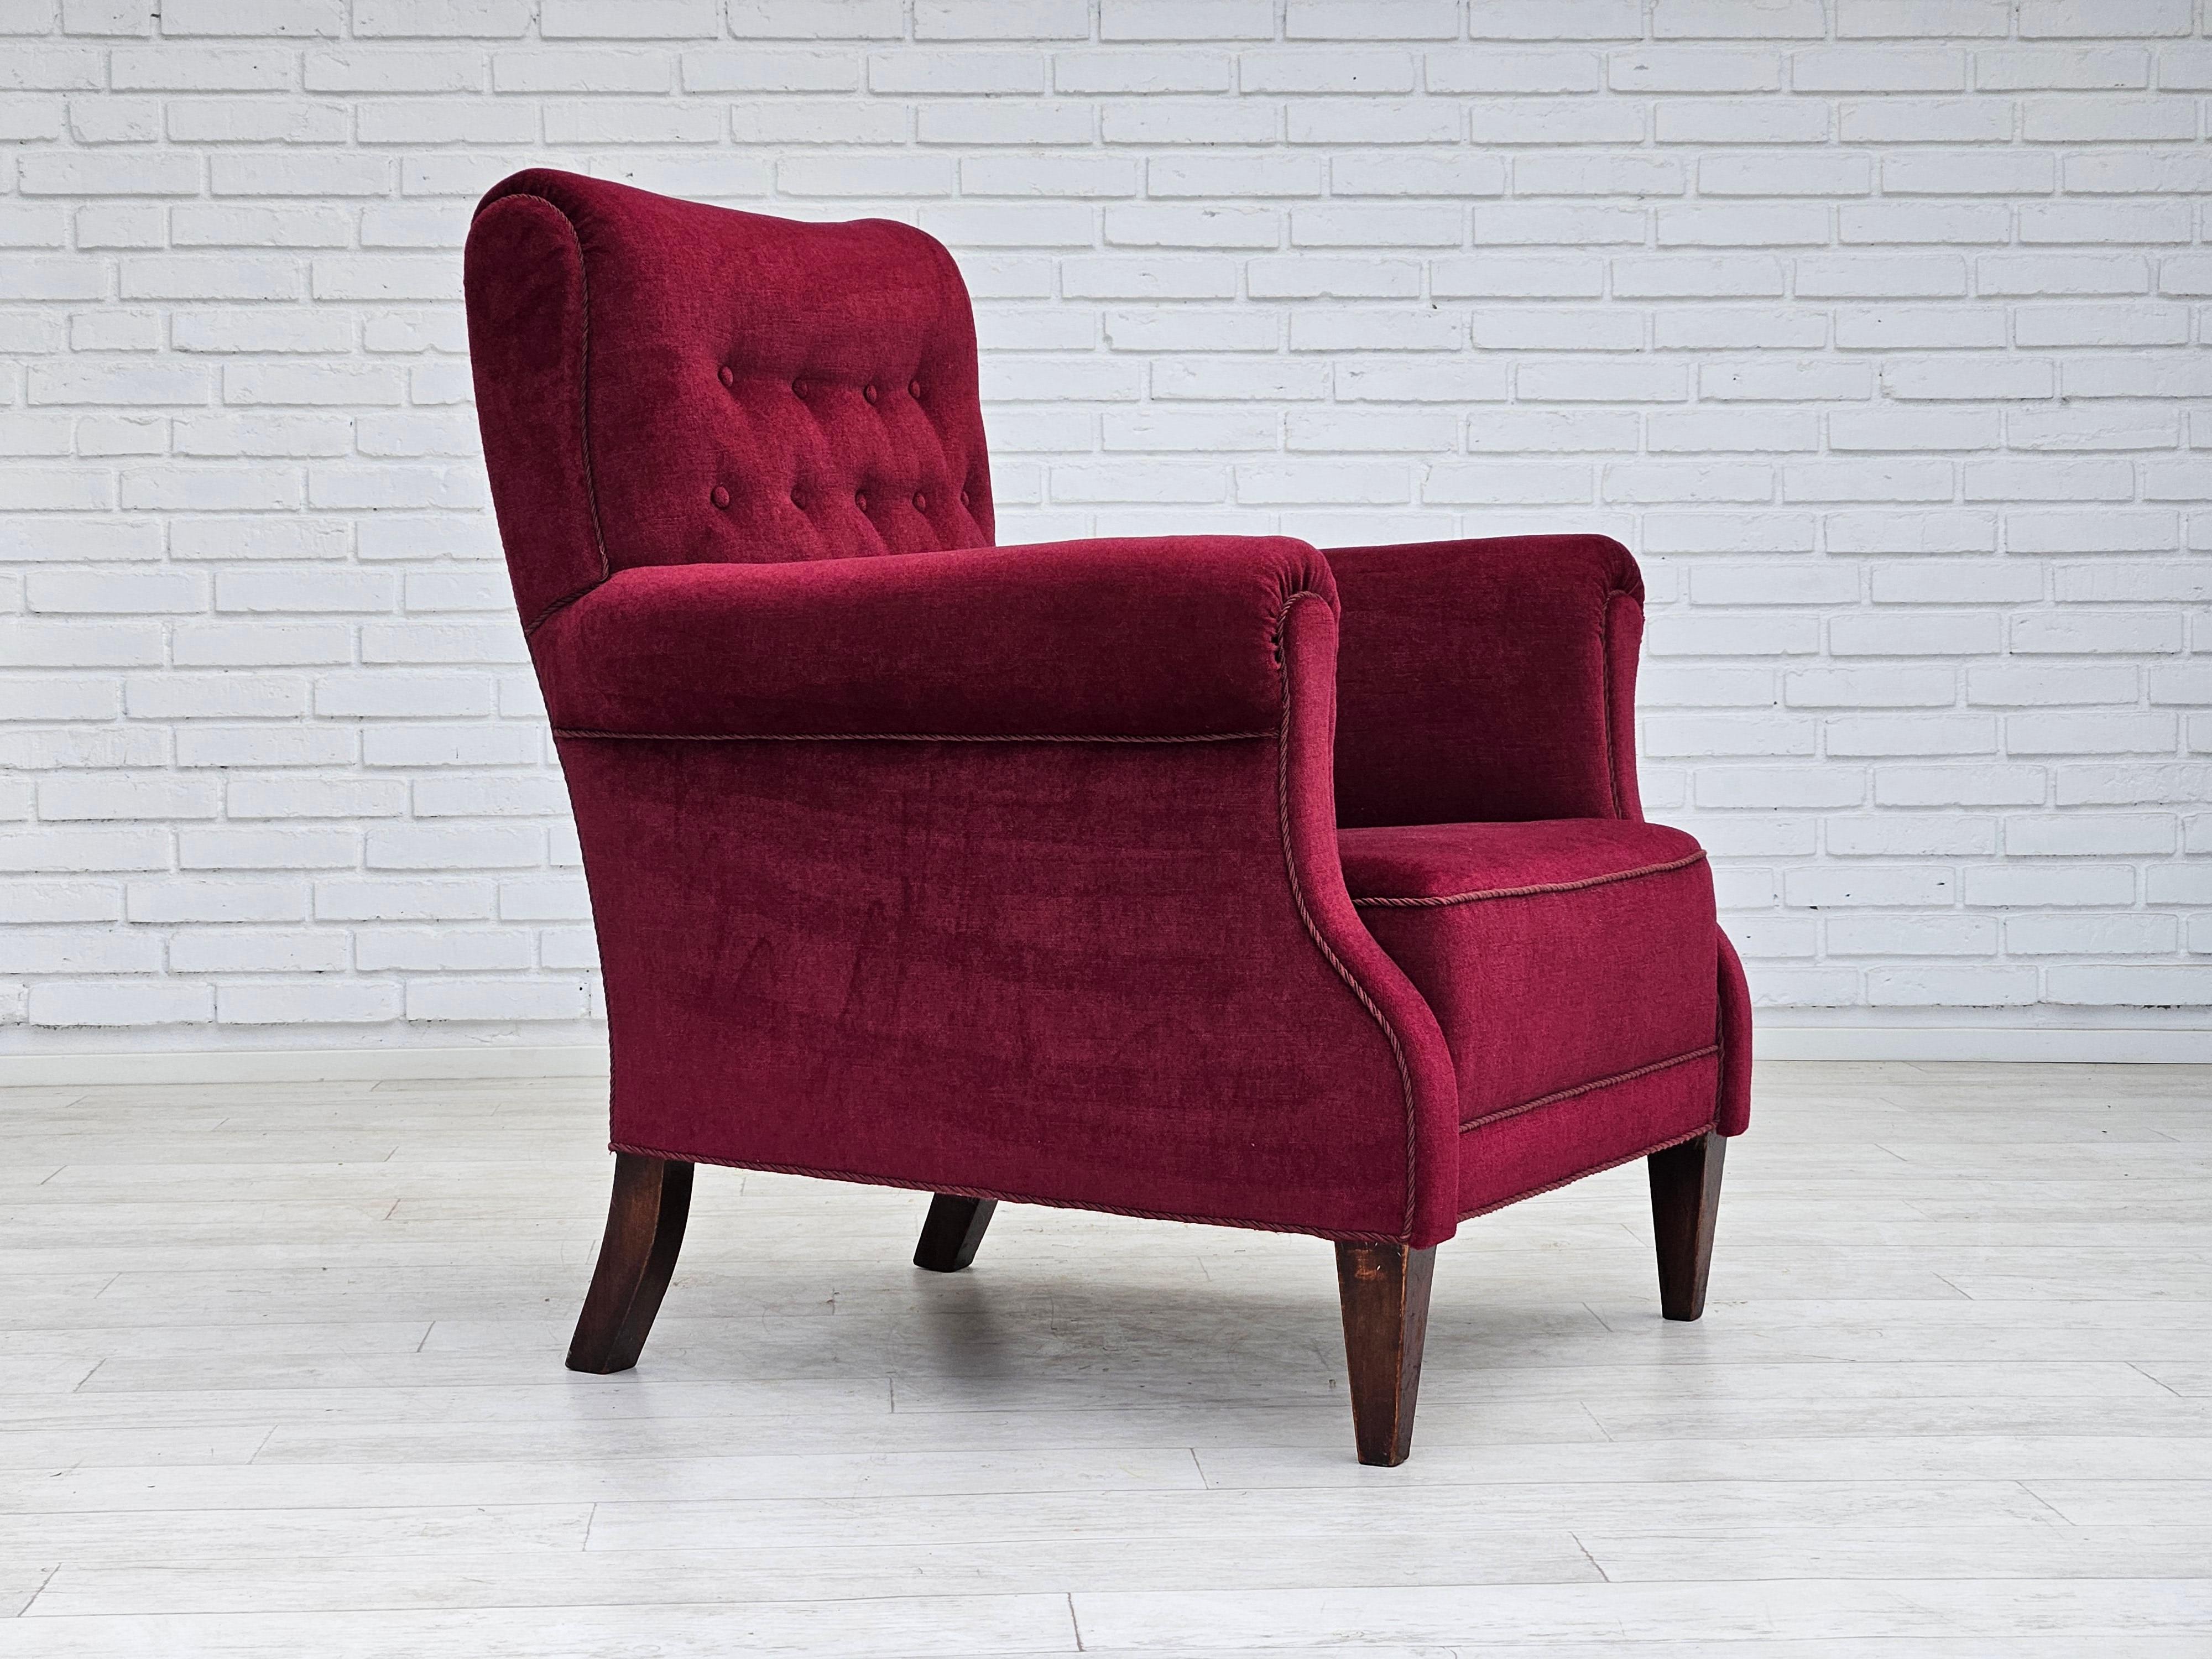 1950s, Danish design. Armchair in cherry-red velour. Original very good condition: no smells and no stains. Ash wood legs. Original springs in the seat. Manufactured by a Danish furniture manufacturer in about 1950-55.